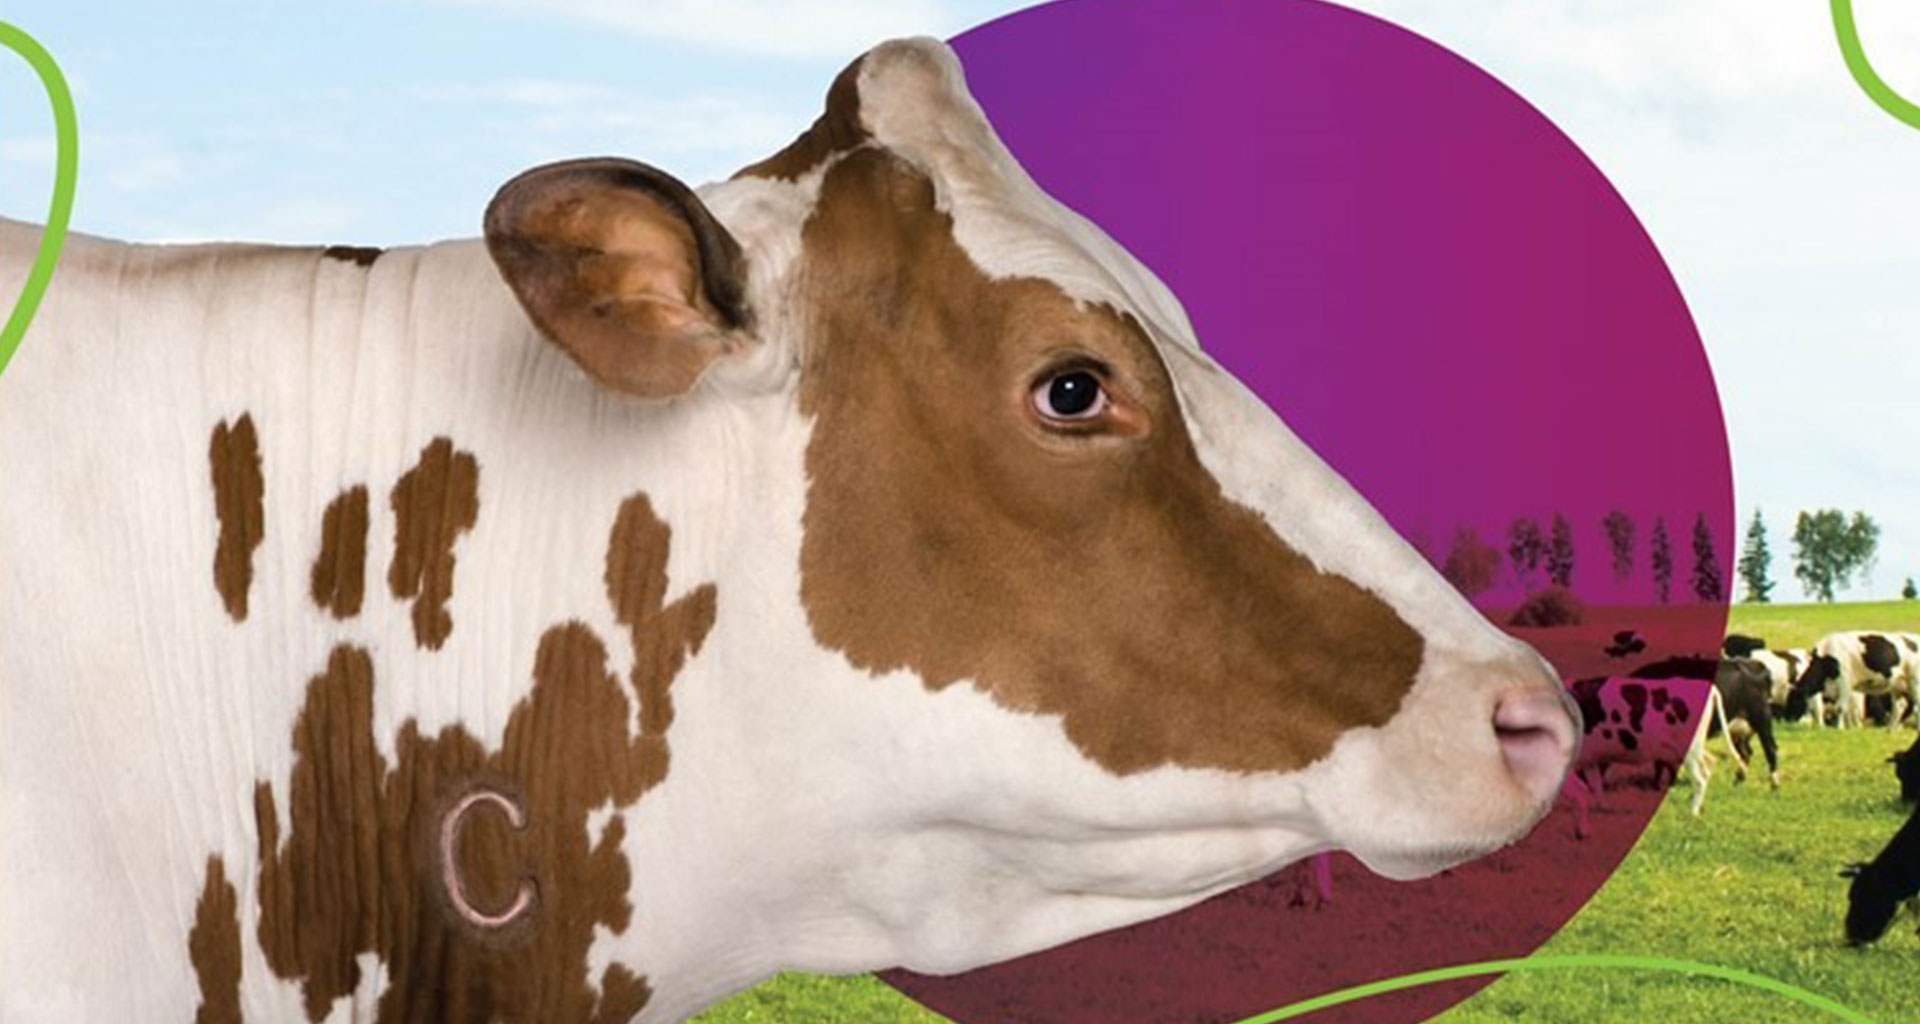 #BrakesonBrucellosis-Brucellosis: CATTLE BRANDING-C=Brucellosis Positive